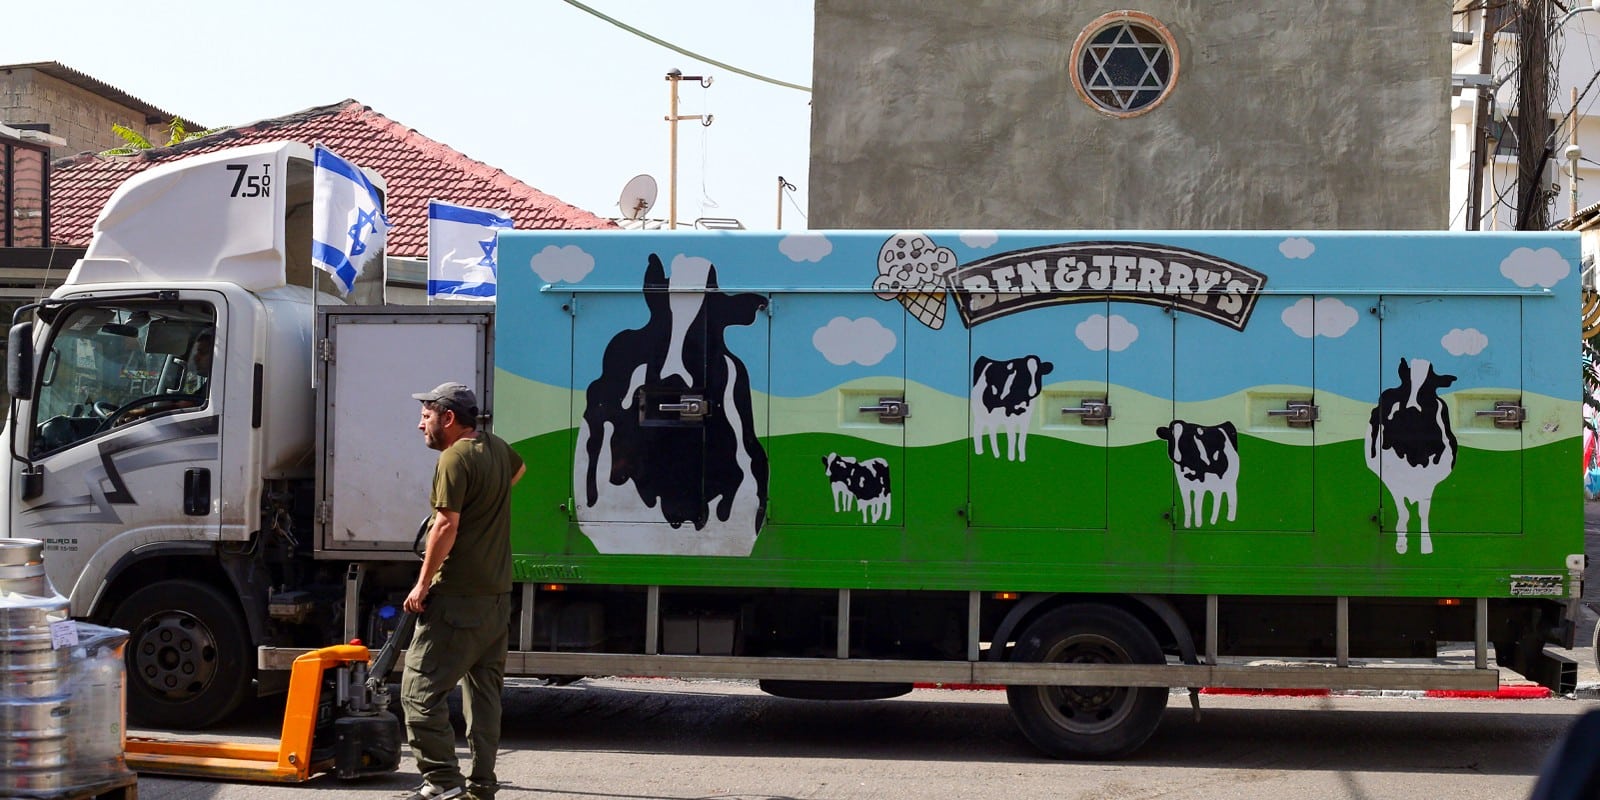 Ben and Jerry's truck in Israel